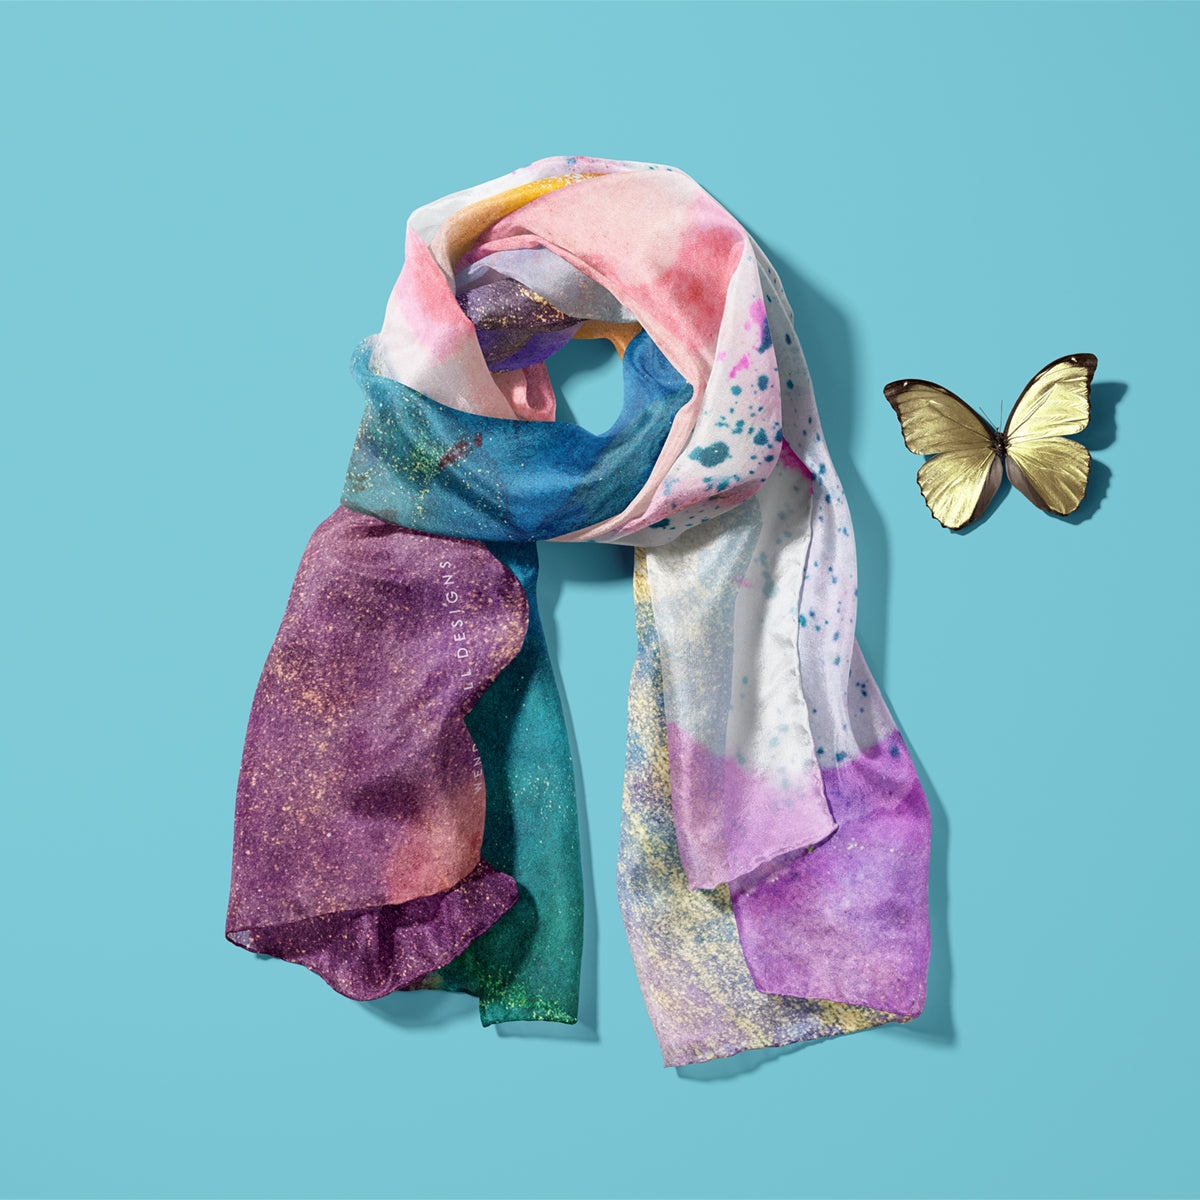 Light and soft, feminine silk scarf with a pretty pattern laid on a blue background with a yellow butterfly next to it